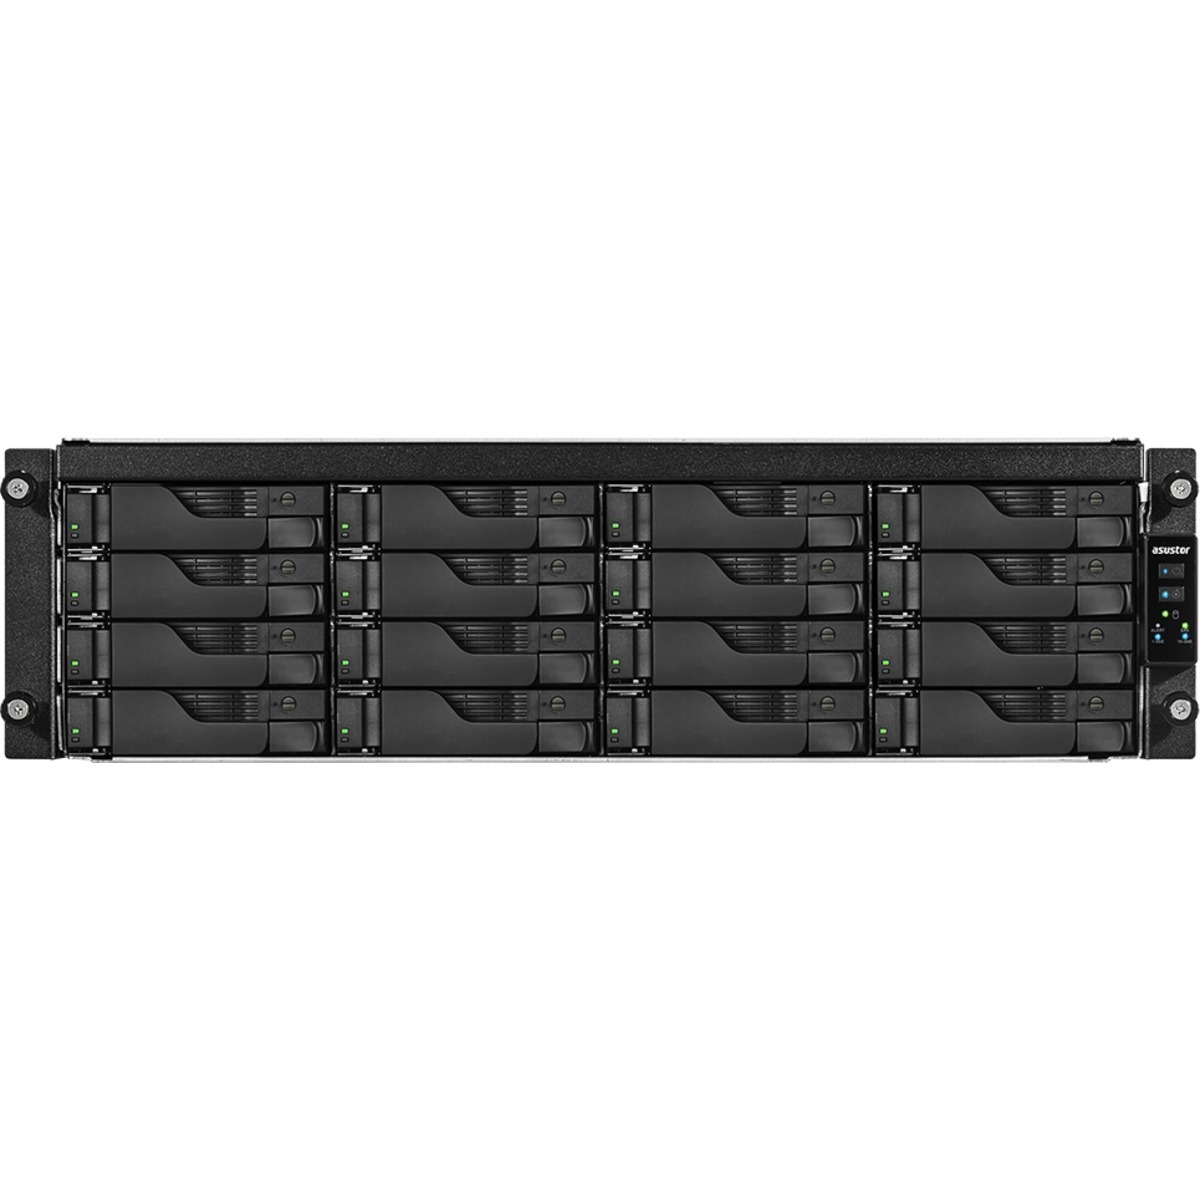 ASUSTOR AS7116RDX Lockerstor 16R Pro 112tb 16-Bay RackMount Large Business / Enterprise NAS - Network Attached Storage Device 14x8tb Seagate IronWolf ST8000VN004 3.5 7200rpm SATA 6Gb/s HDD NAS Class Drives Installed - Burn-In Tested AS7116RDX Lockerstor 16R Pro